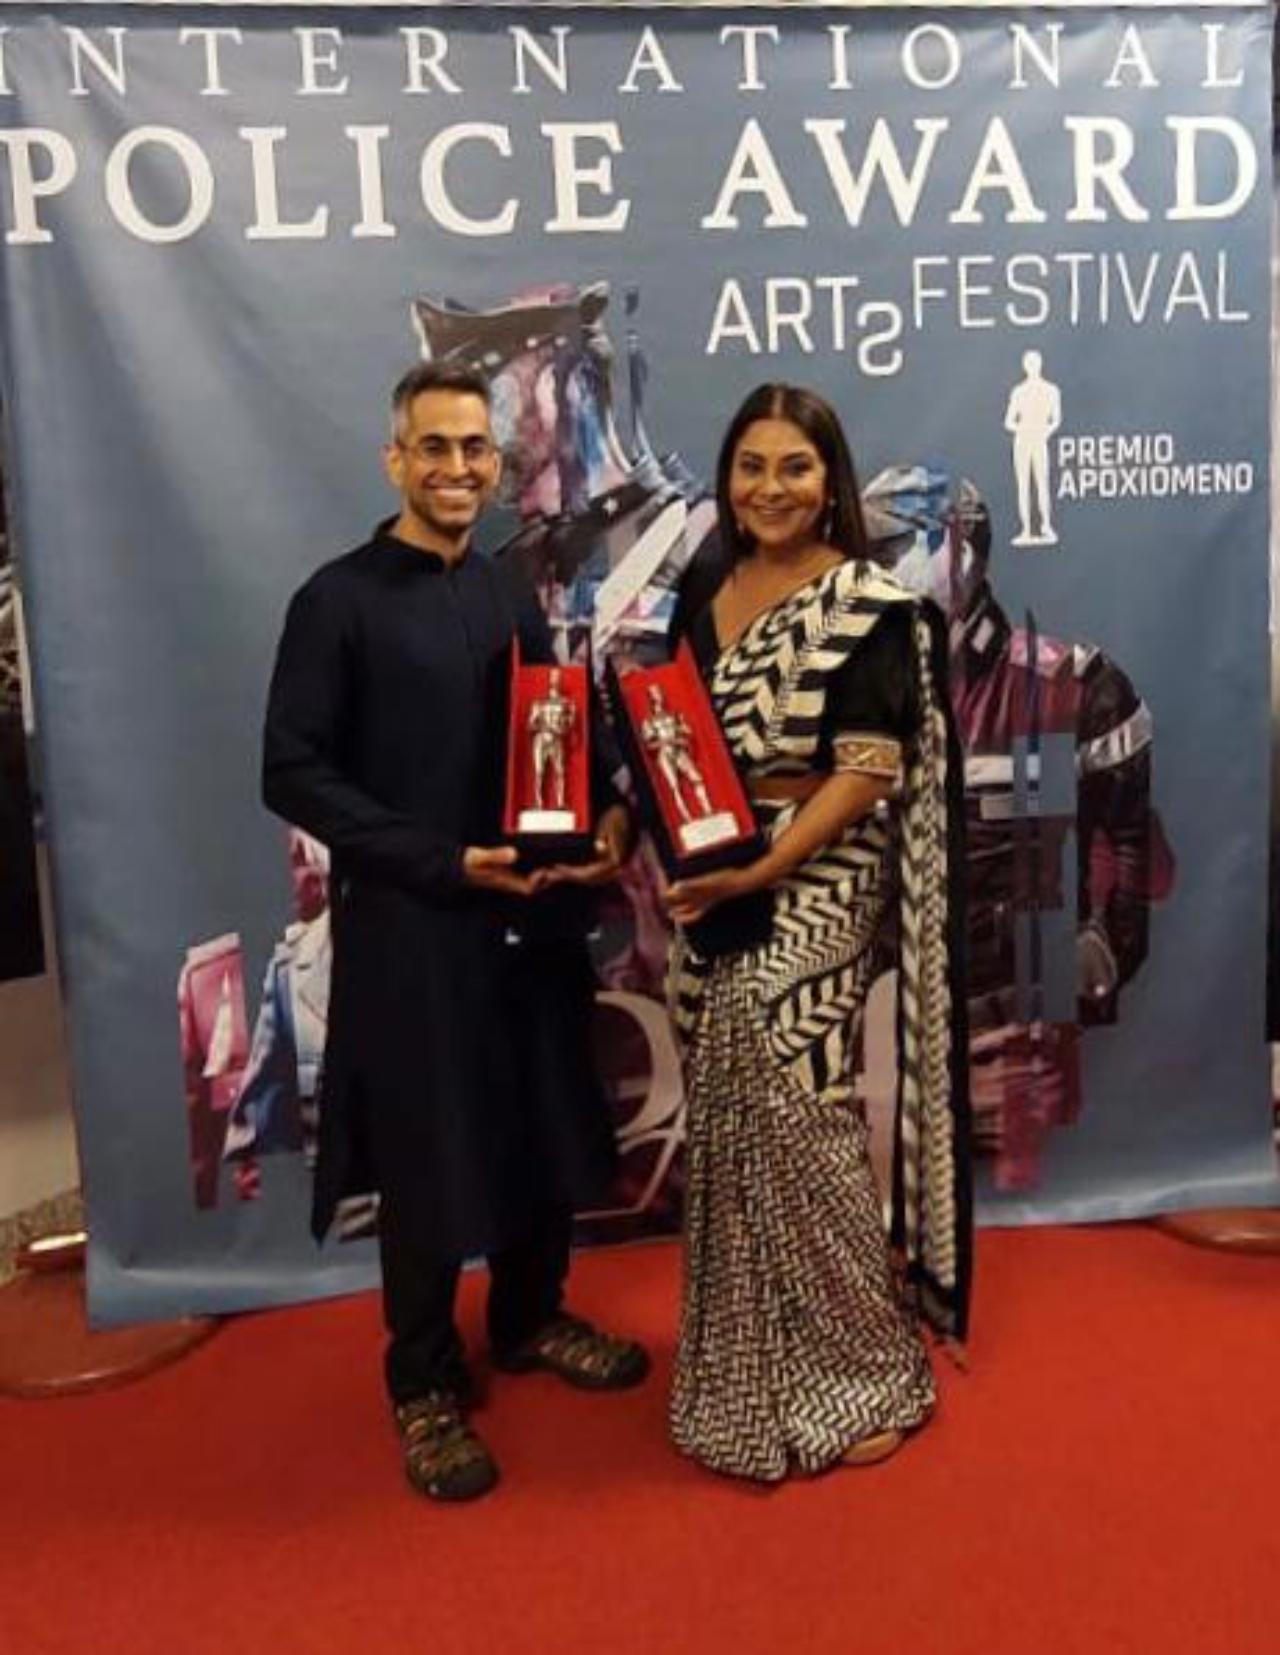 The actress truly took her character of DCP Vartika Chaturvedi IPS in the series to the next level which made her win the best actress award at the Police Award Arts Festival Premio Apoxiomeno for the presentation of cops and the police force in art and cinema for Delhi Crime S1, whereas the director Richie Mehta won the best director